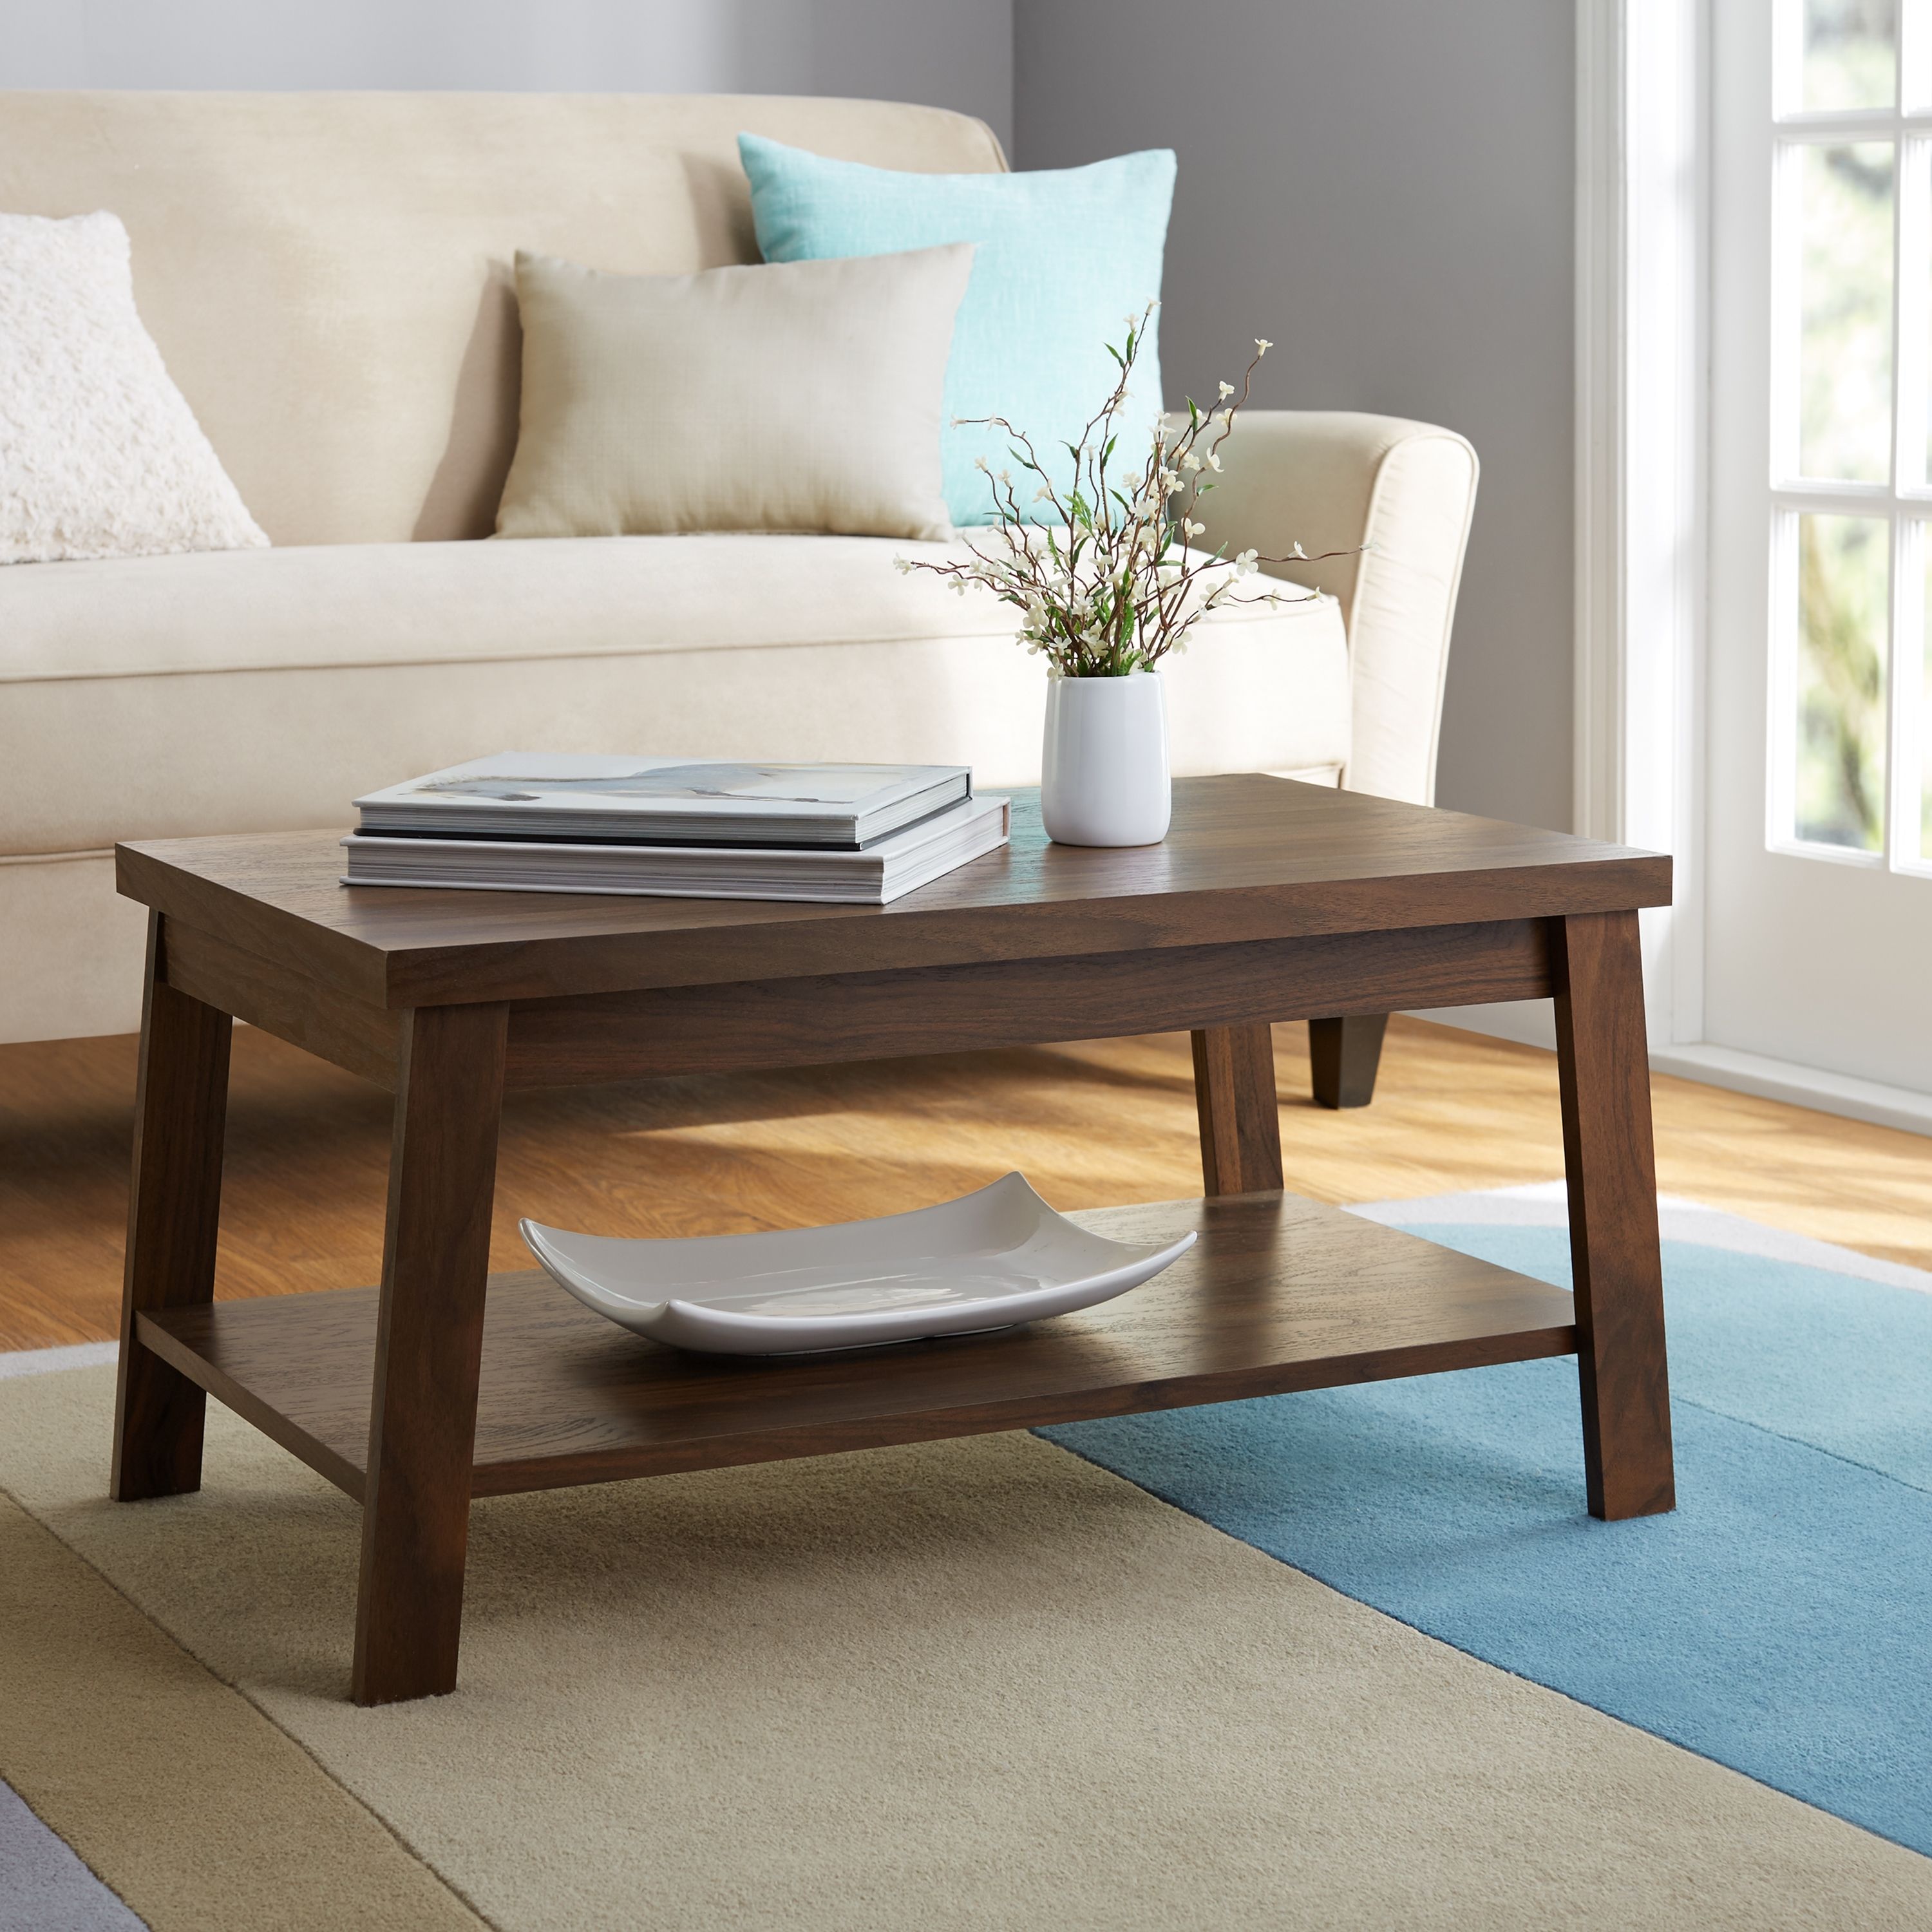 Mainstays Logan Coffee Table, Multiple Finishes – Walmart Pertaining To Best And Newest Logan Cocktail Tables (View 1 of 20)